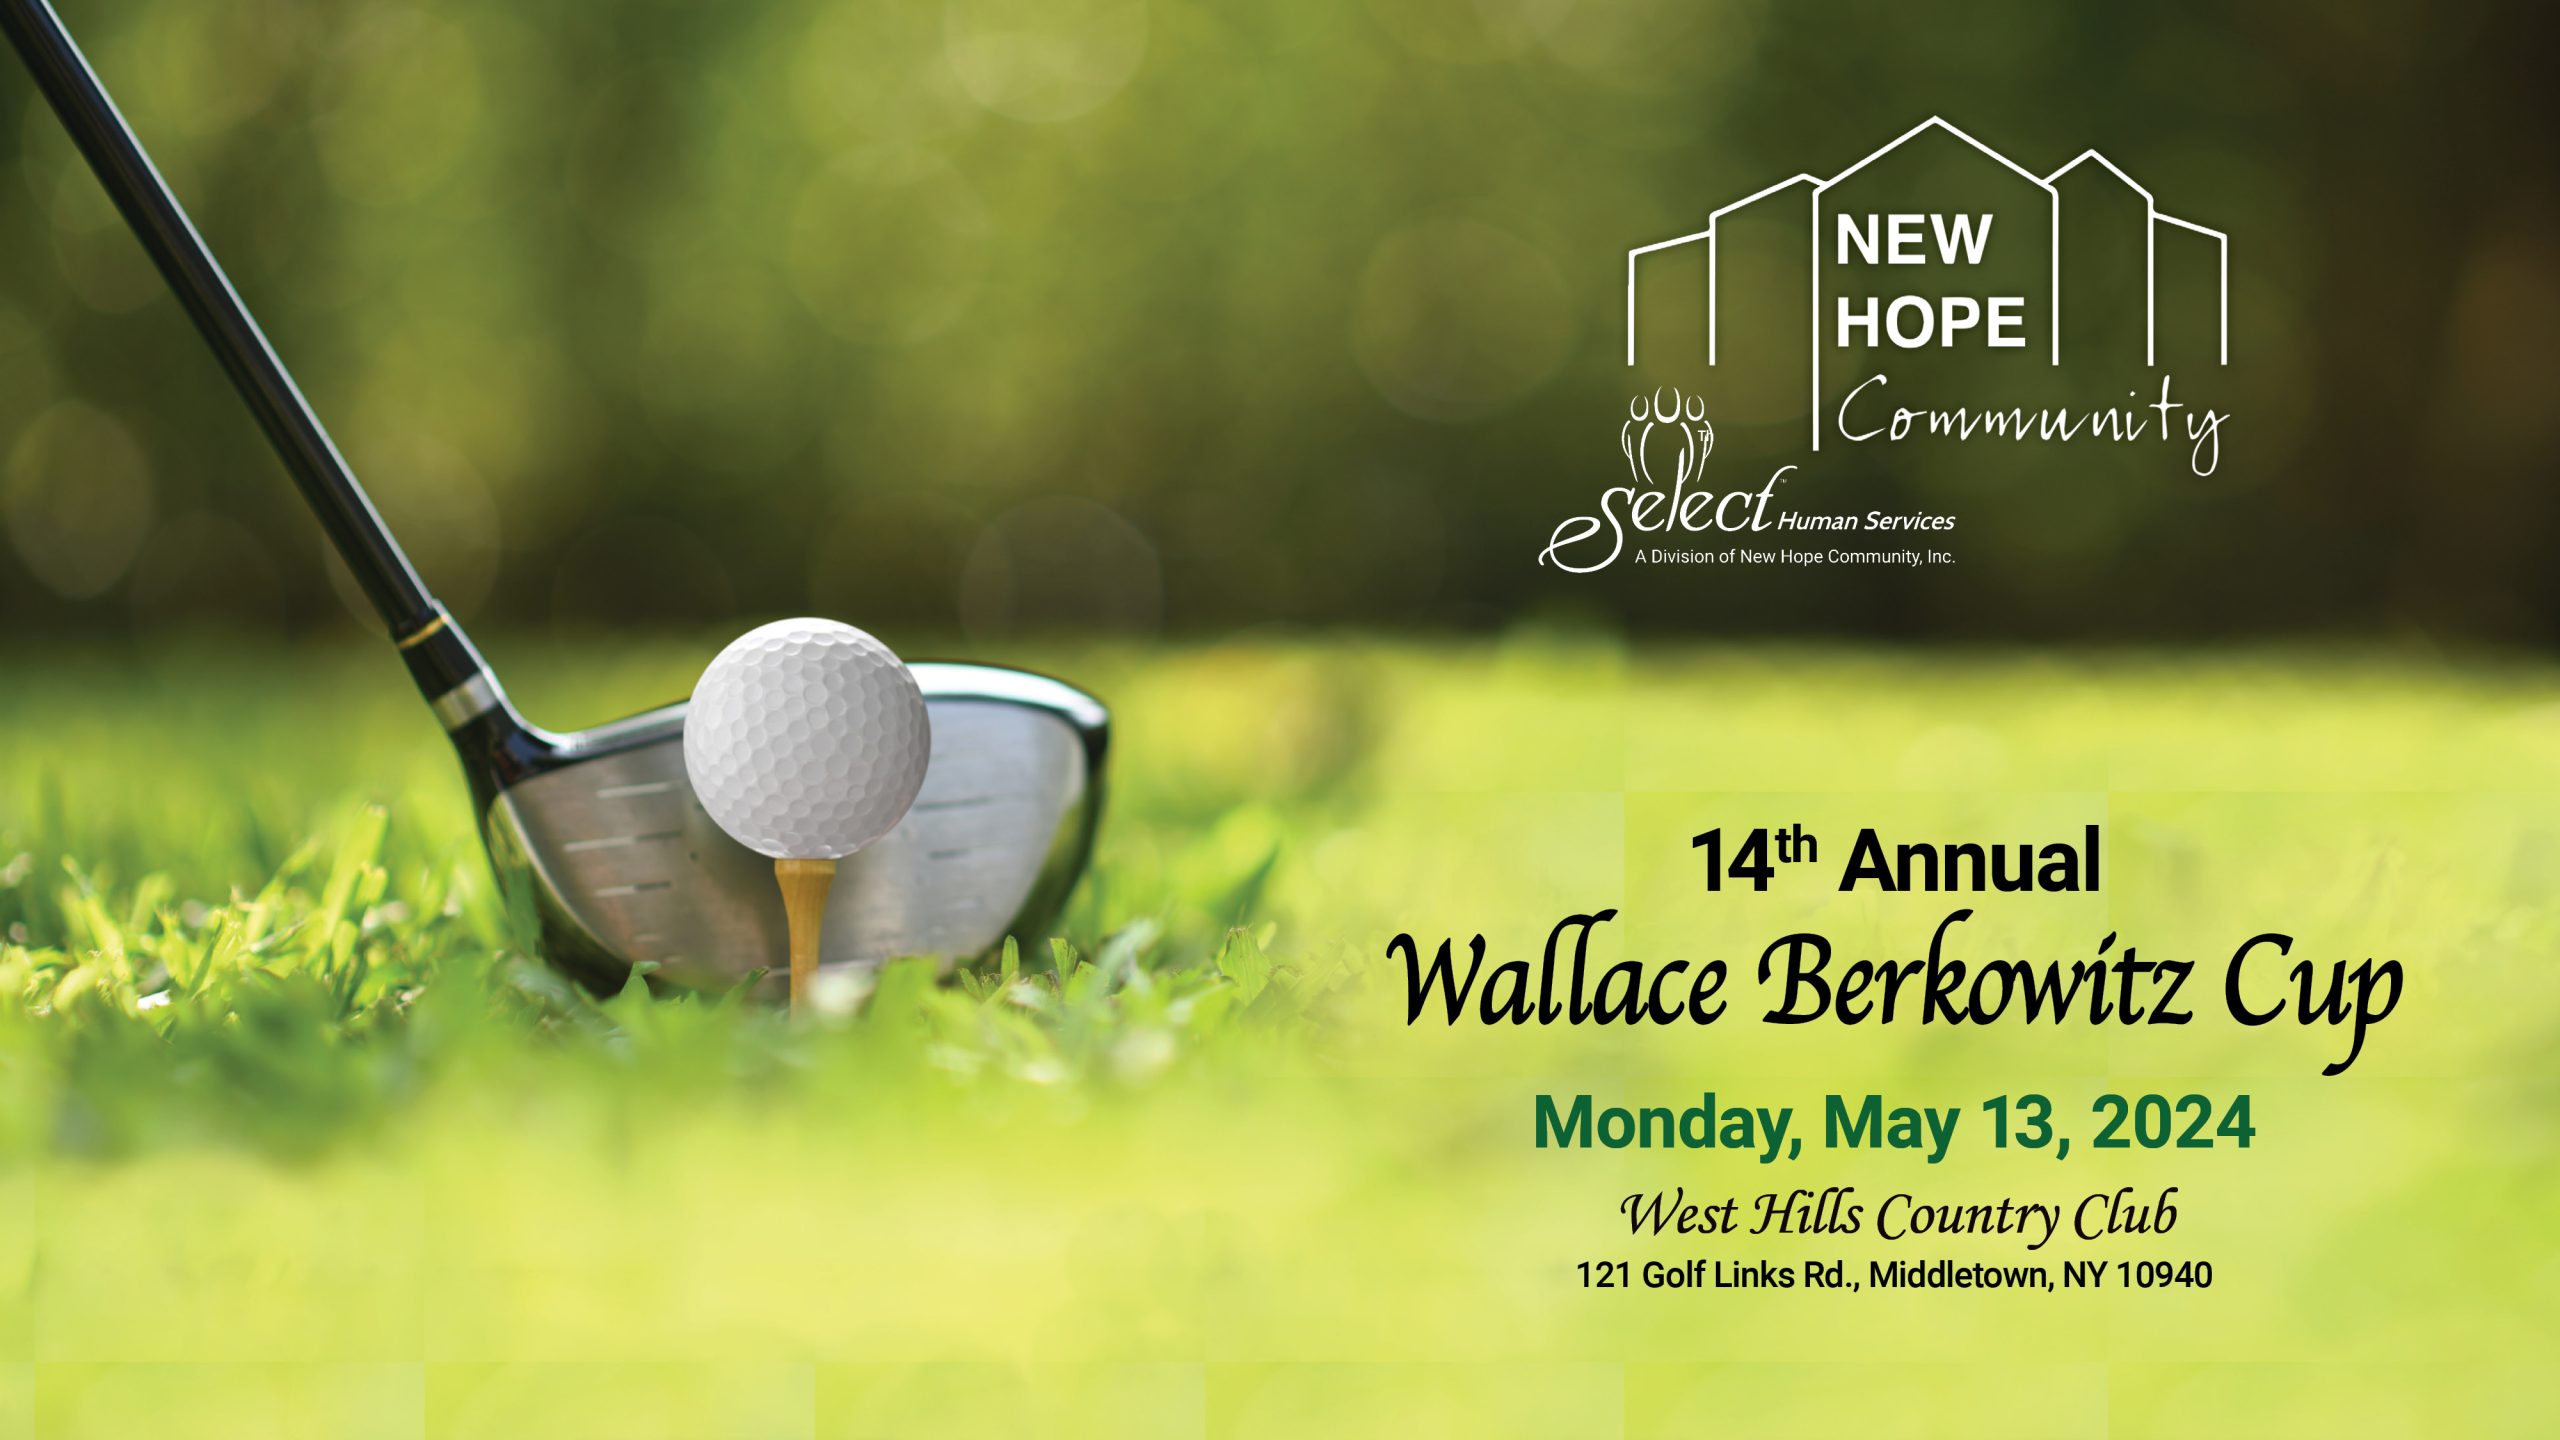 13th Annual Wallace Berkowitz Cup